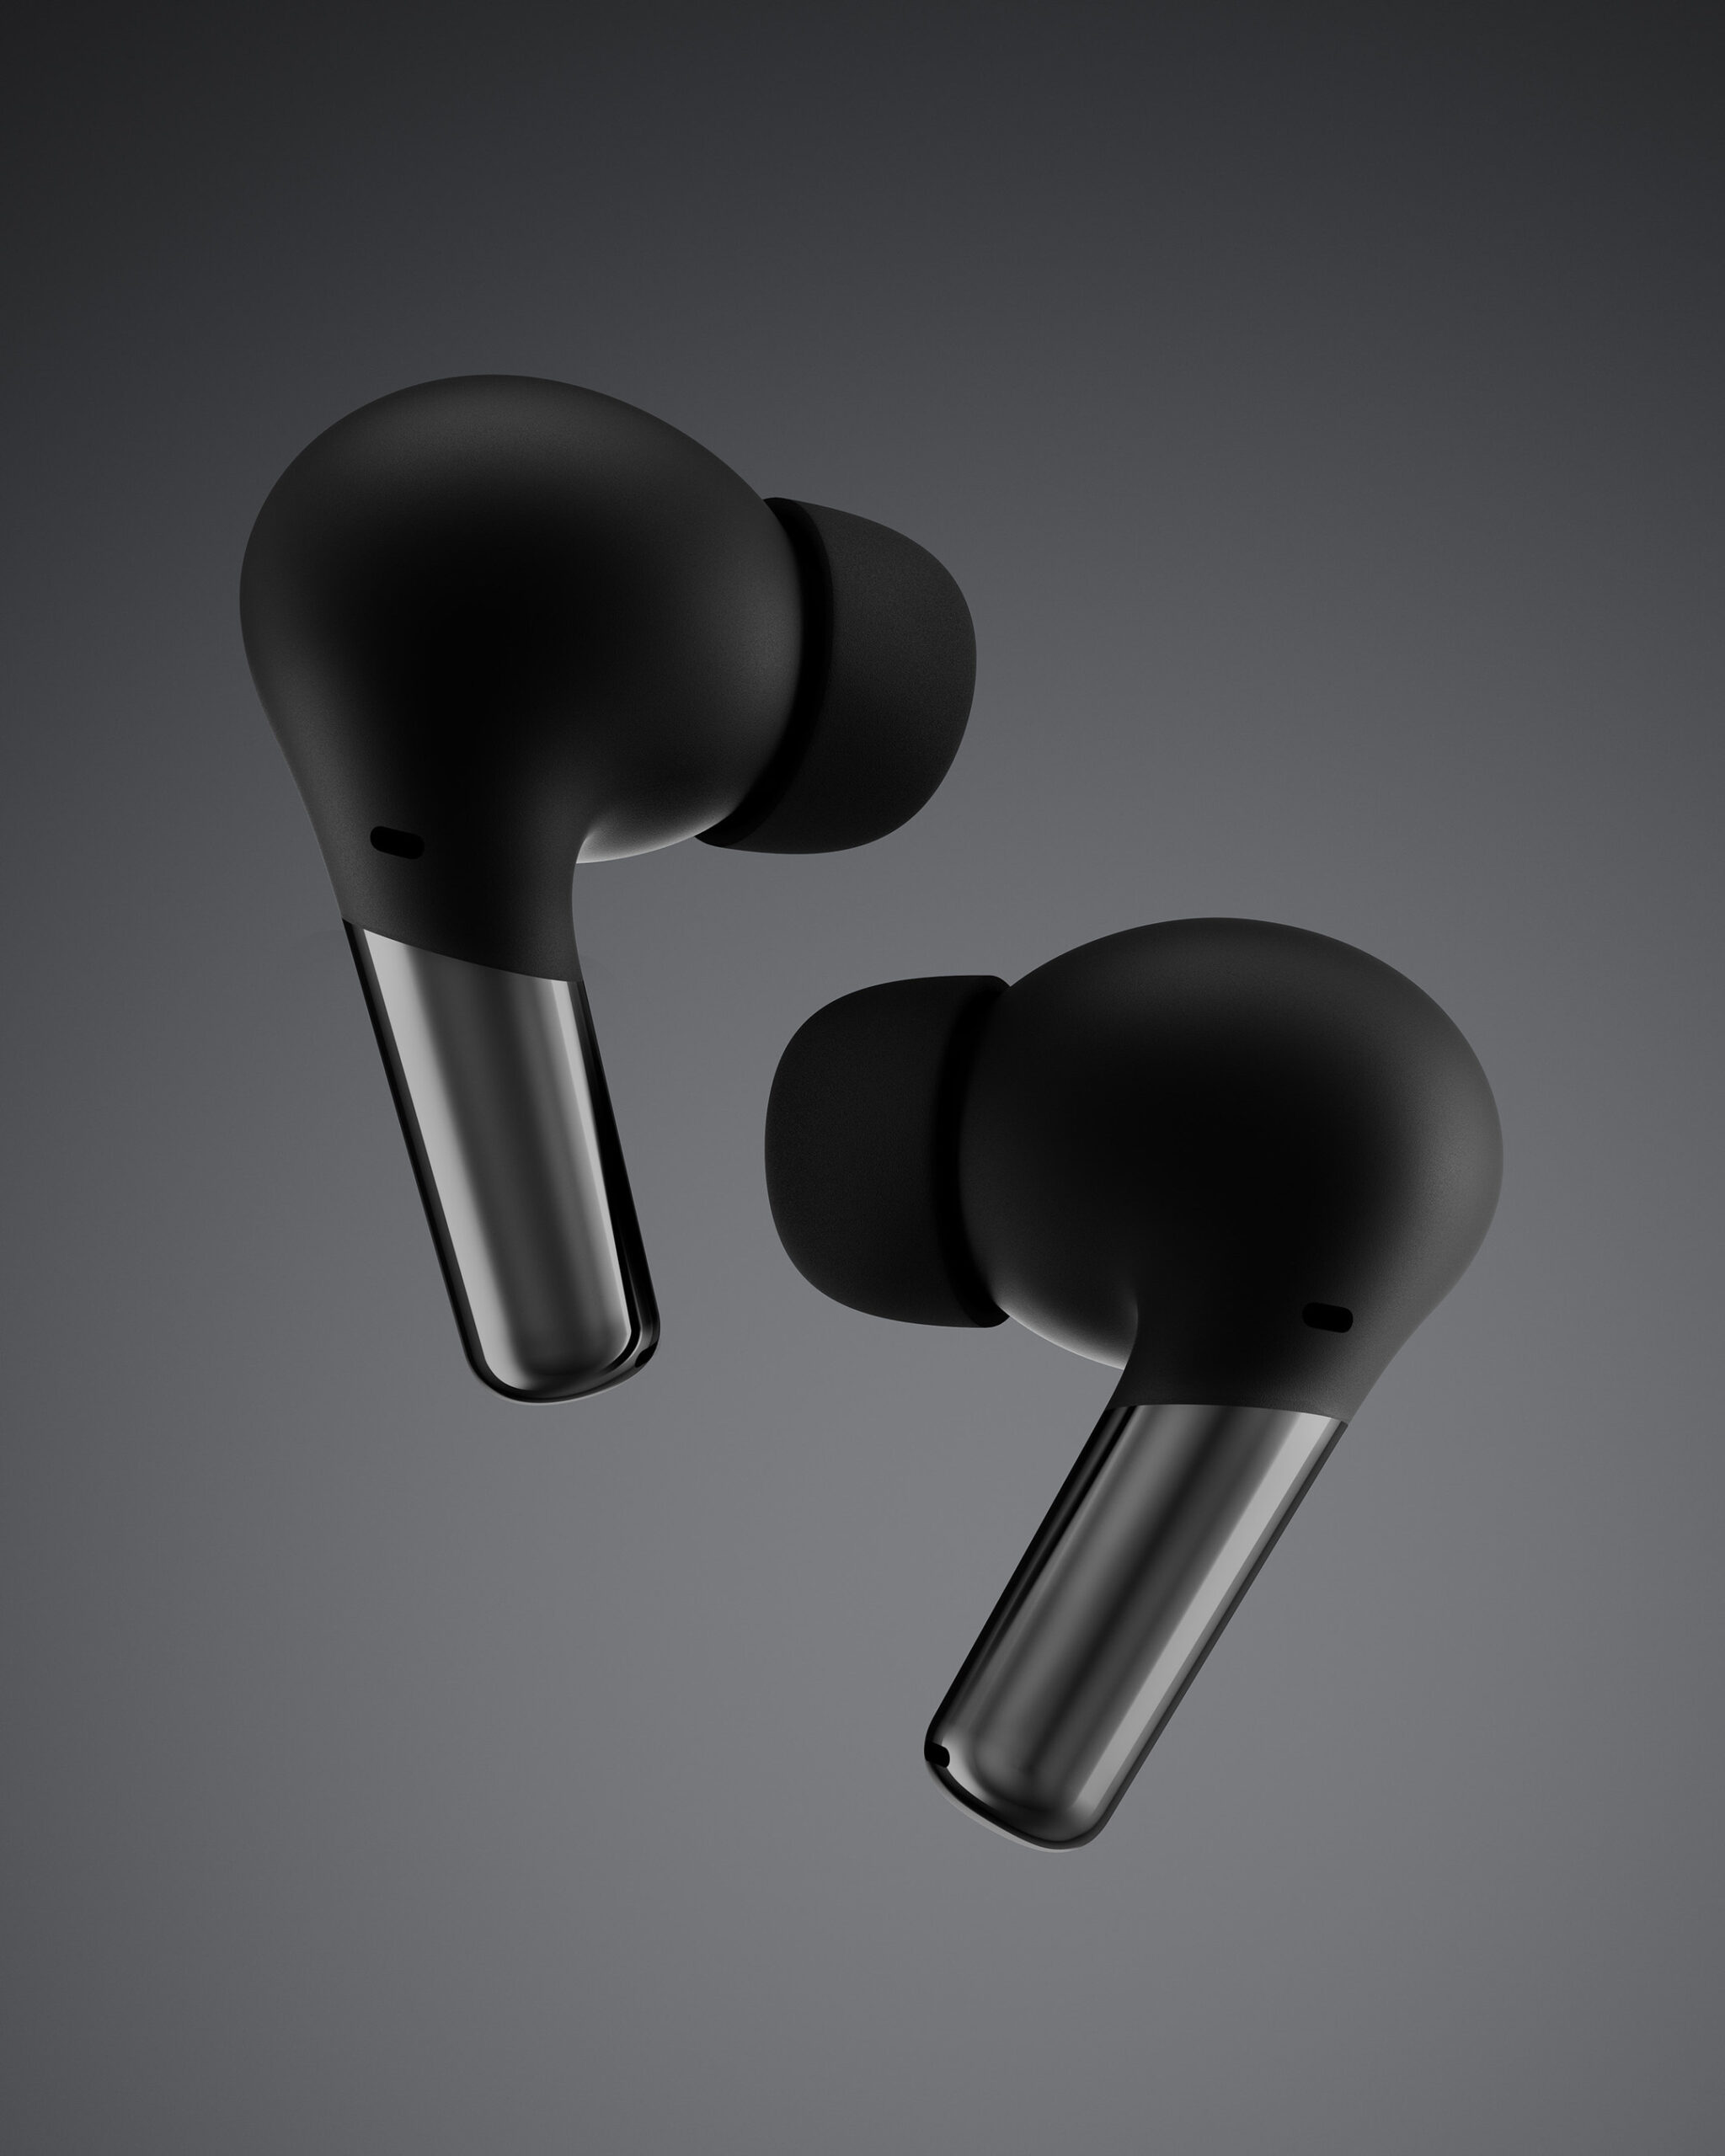 OnePlus Enters Premium Audio Space with OnePlus Buds Pro True Wireless Earbuds